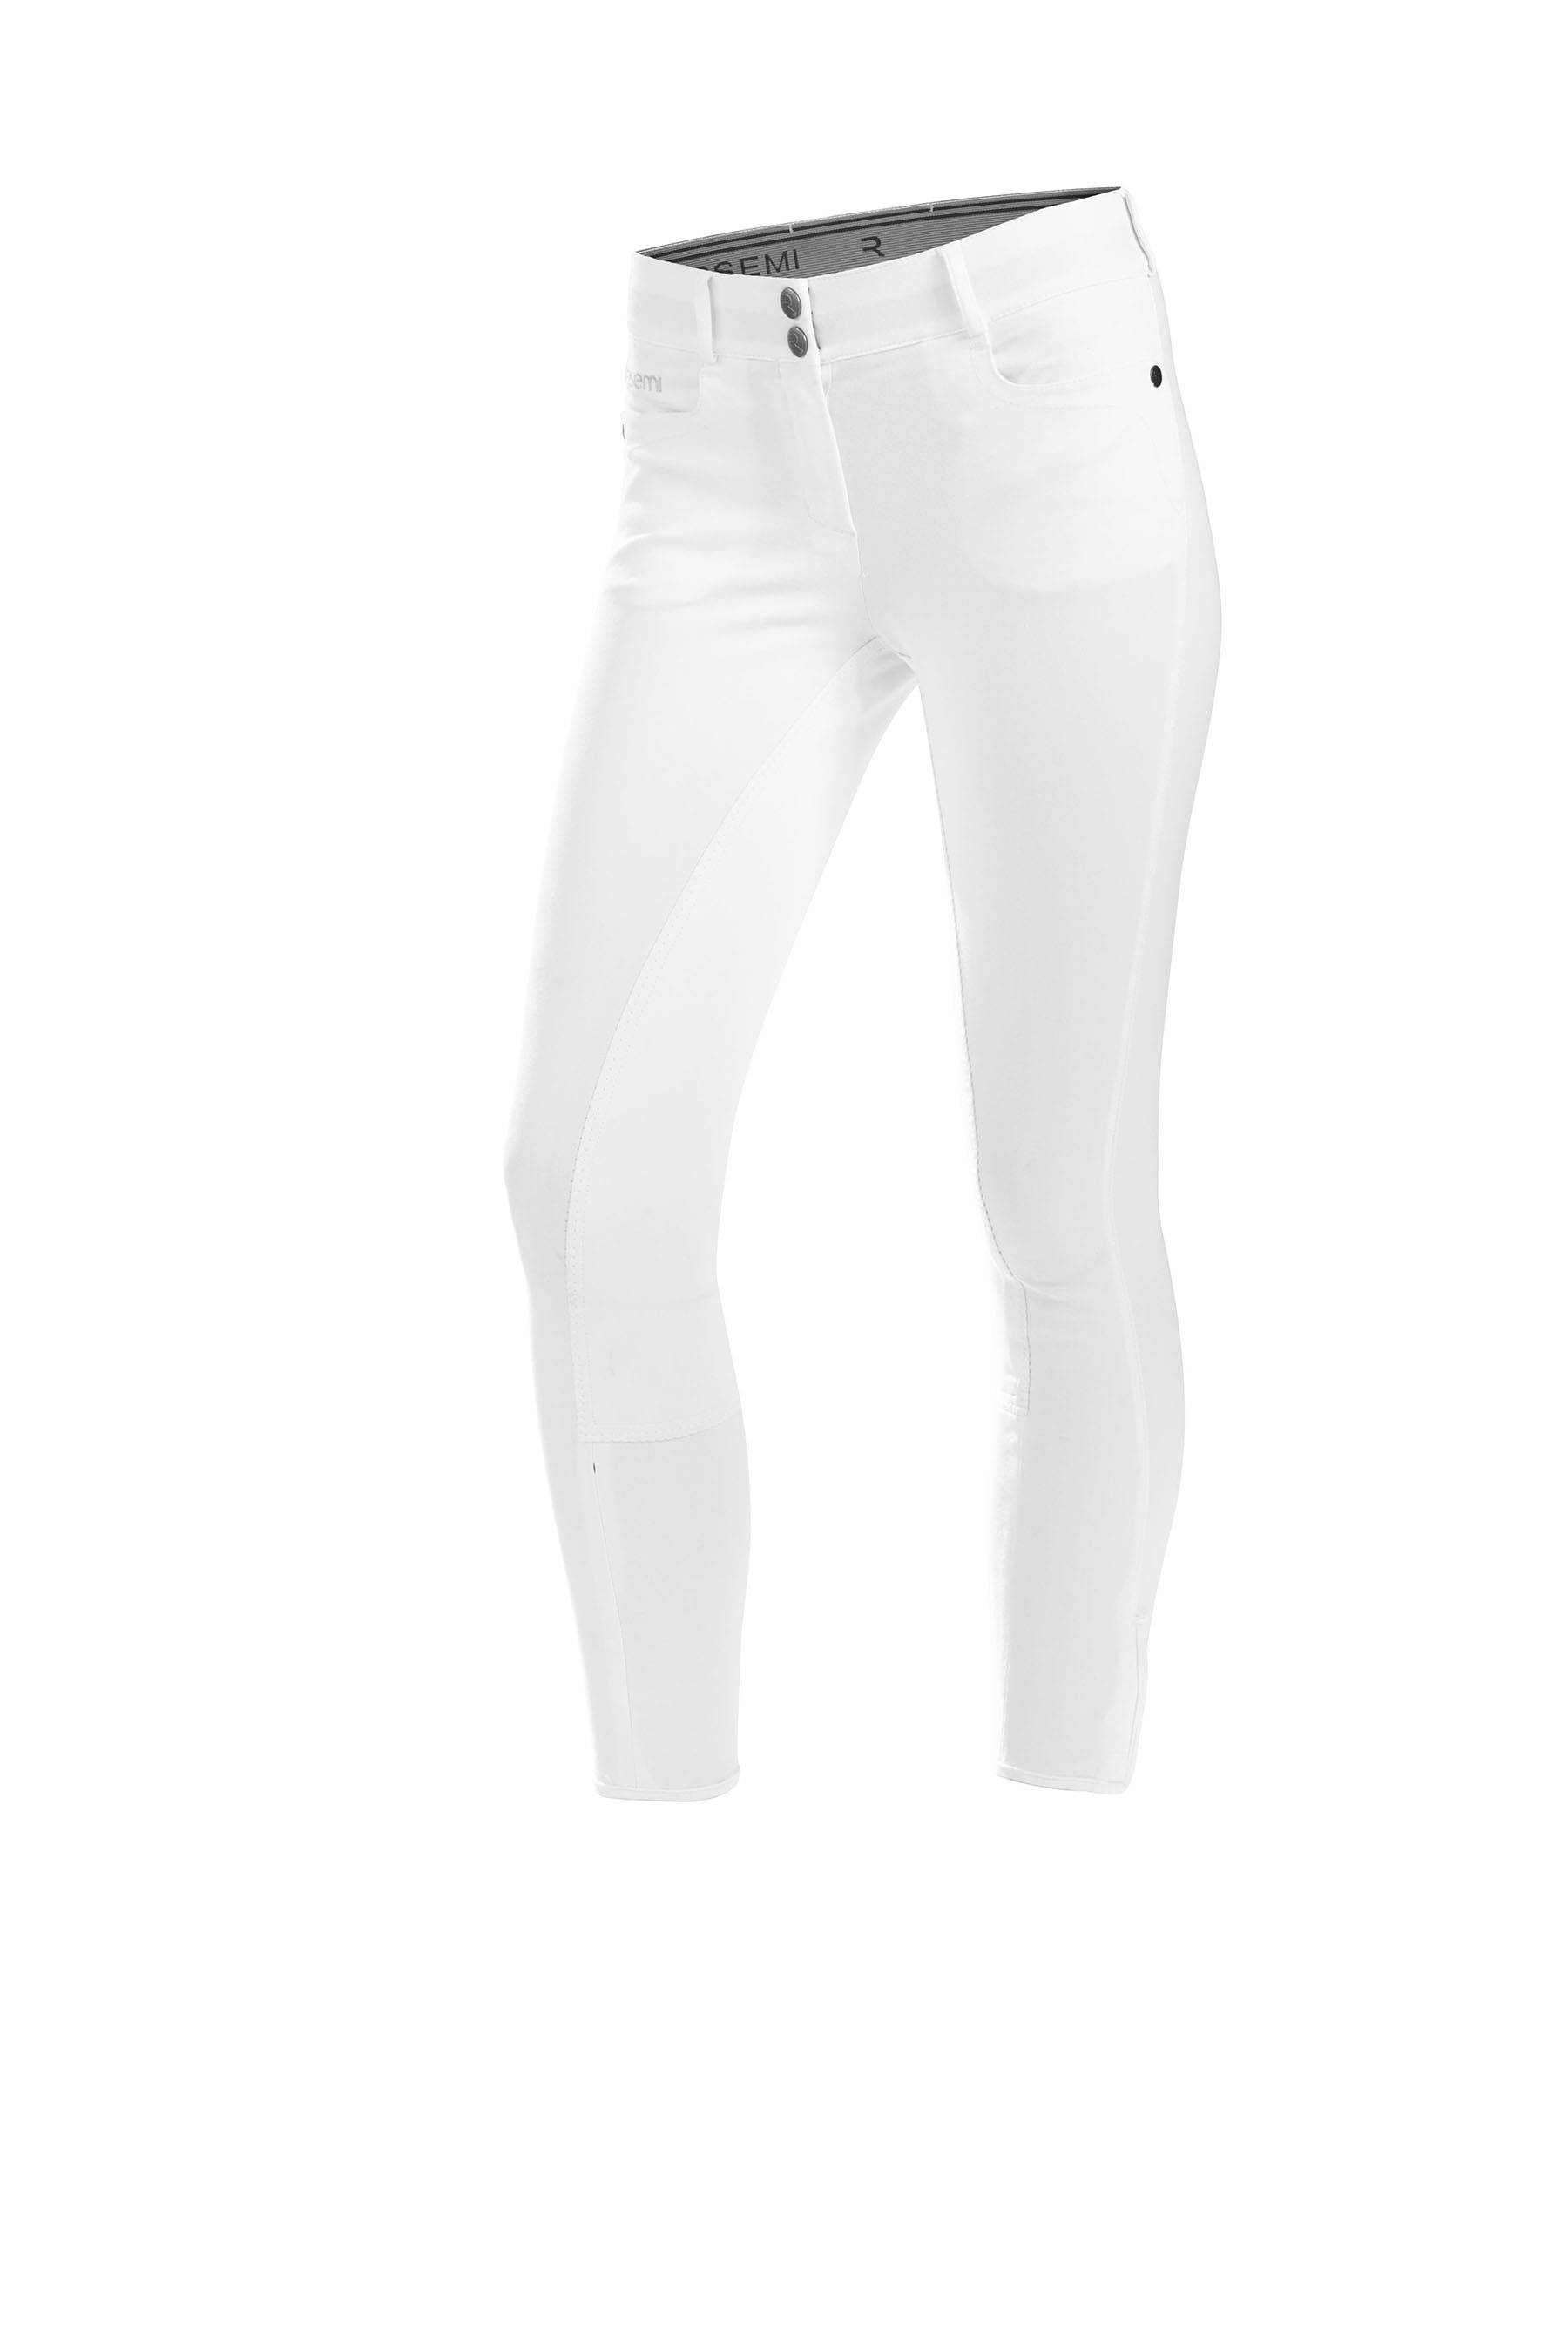 Gersemi Sigyn Knee Patch Breeches - Ladies - White